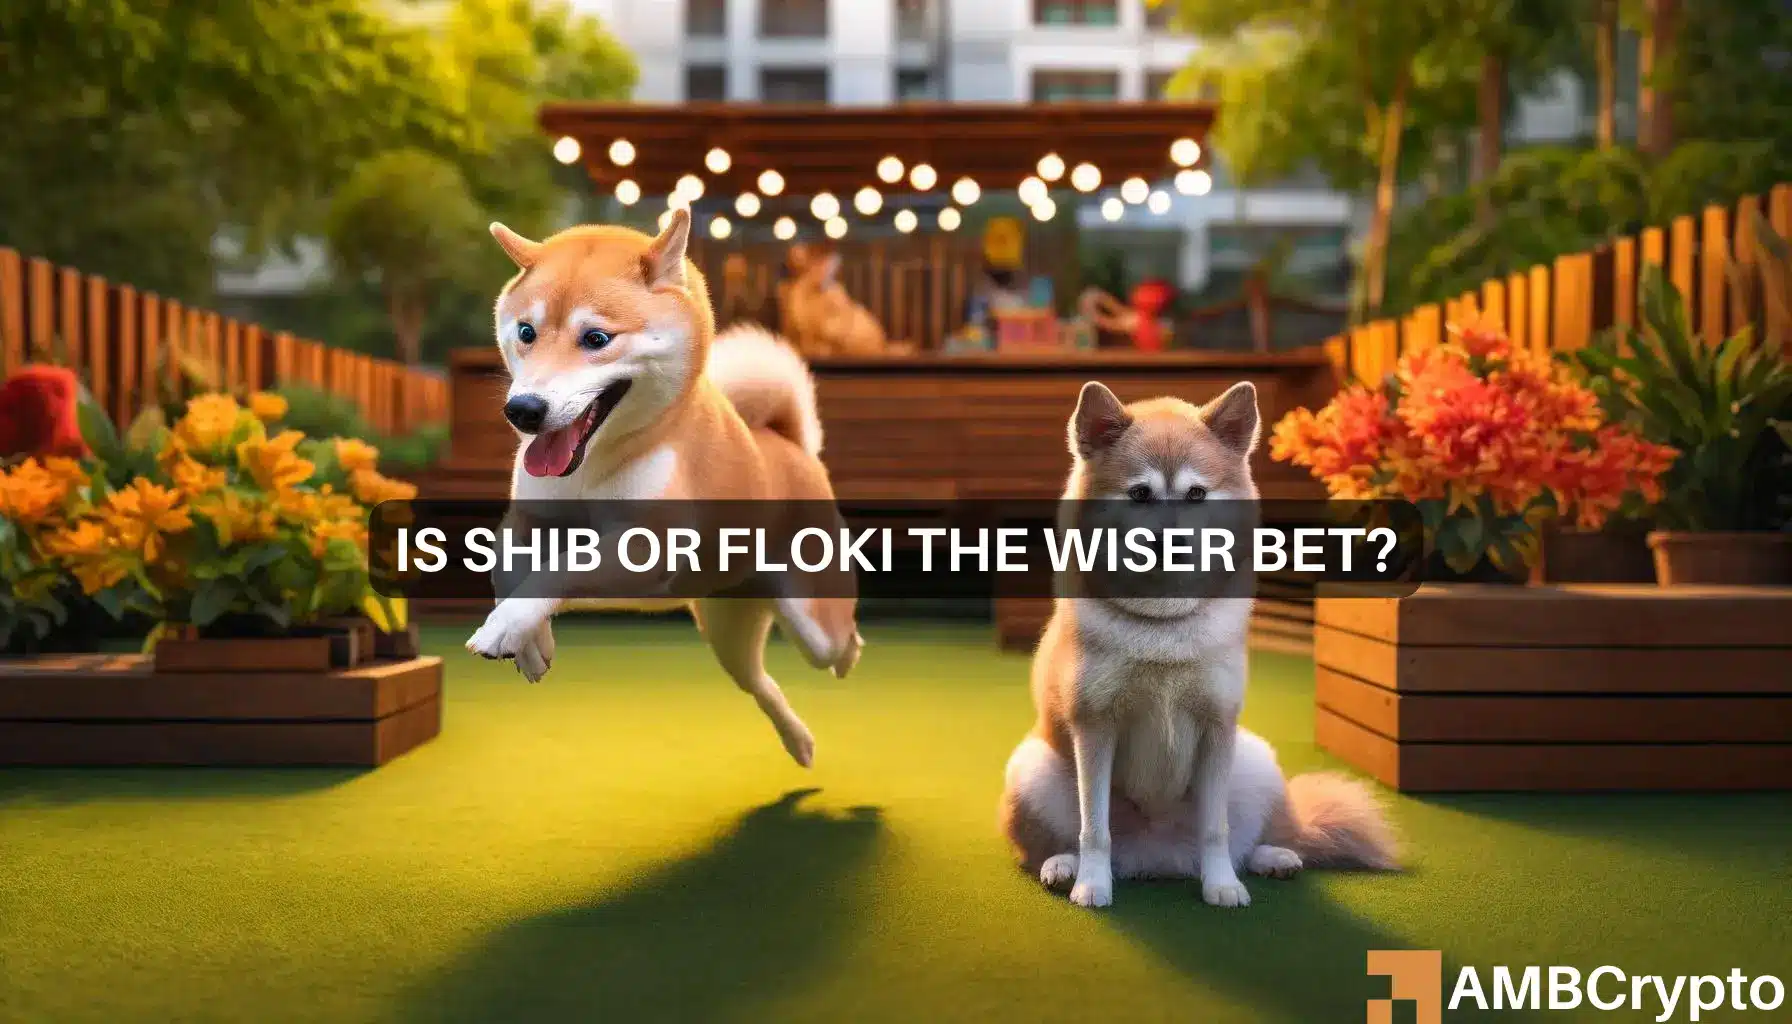 SHIB or FLOKI: Which memecoin should you bet on today?